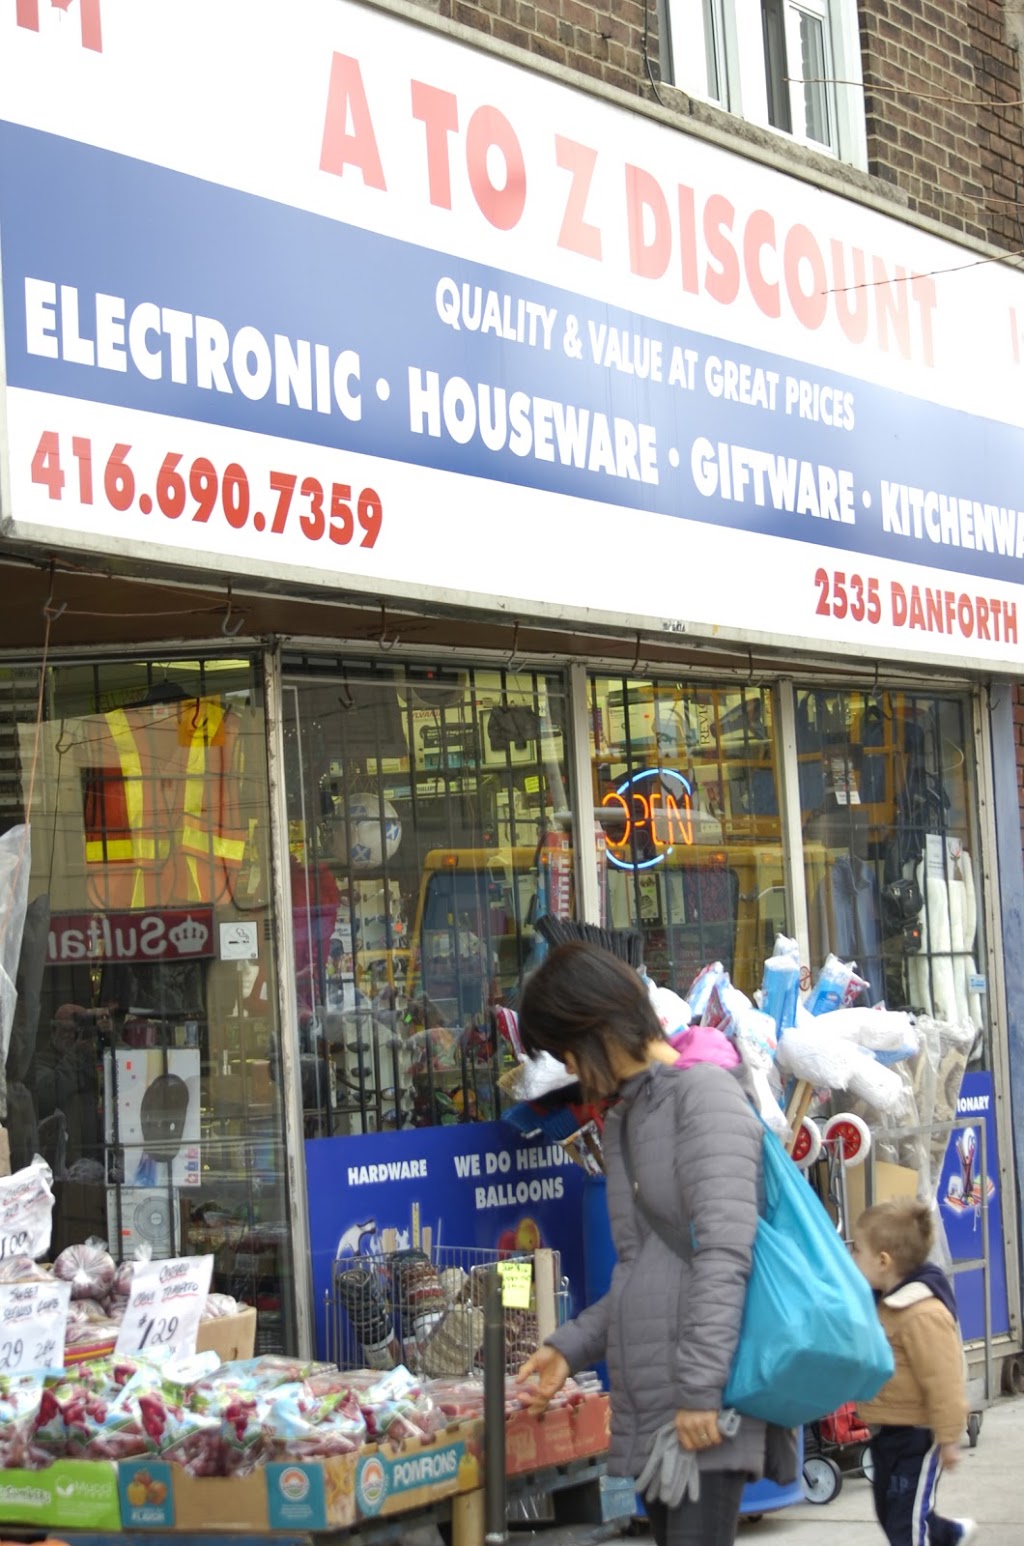 A to Z Discount | 2535 Danforth Ave, Toronto, ON M4C 1L1, Canada | Phone: (416) 690-7359